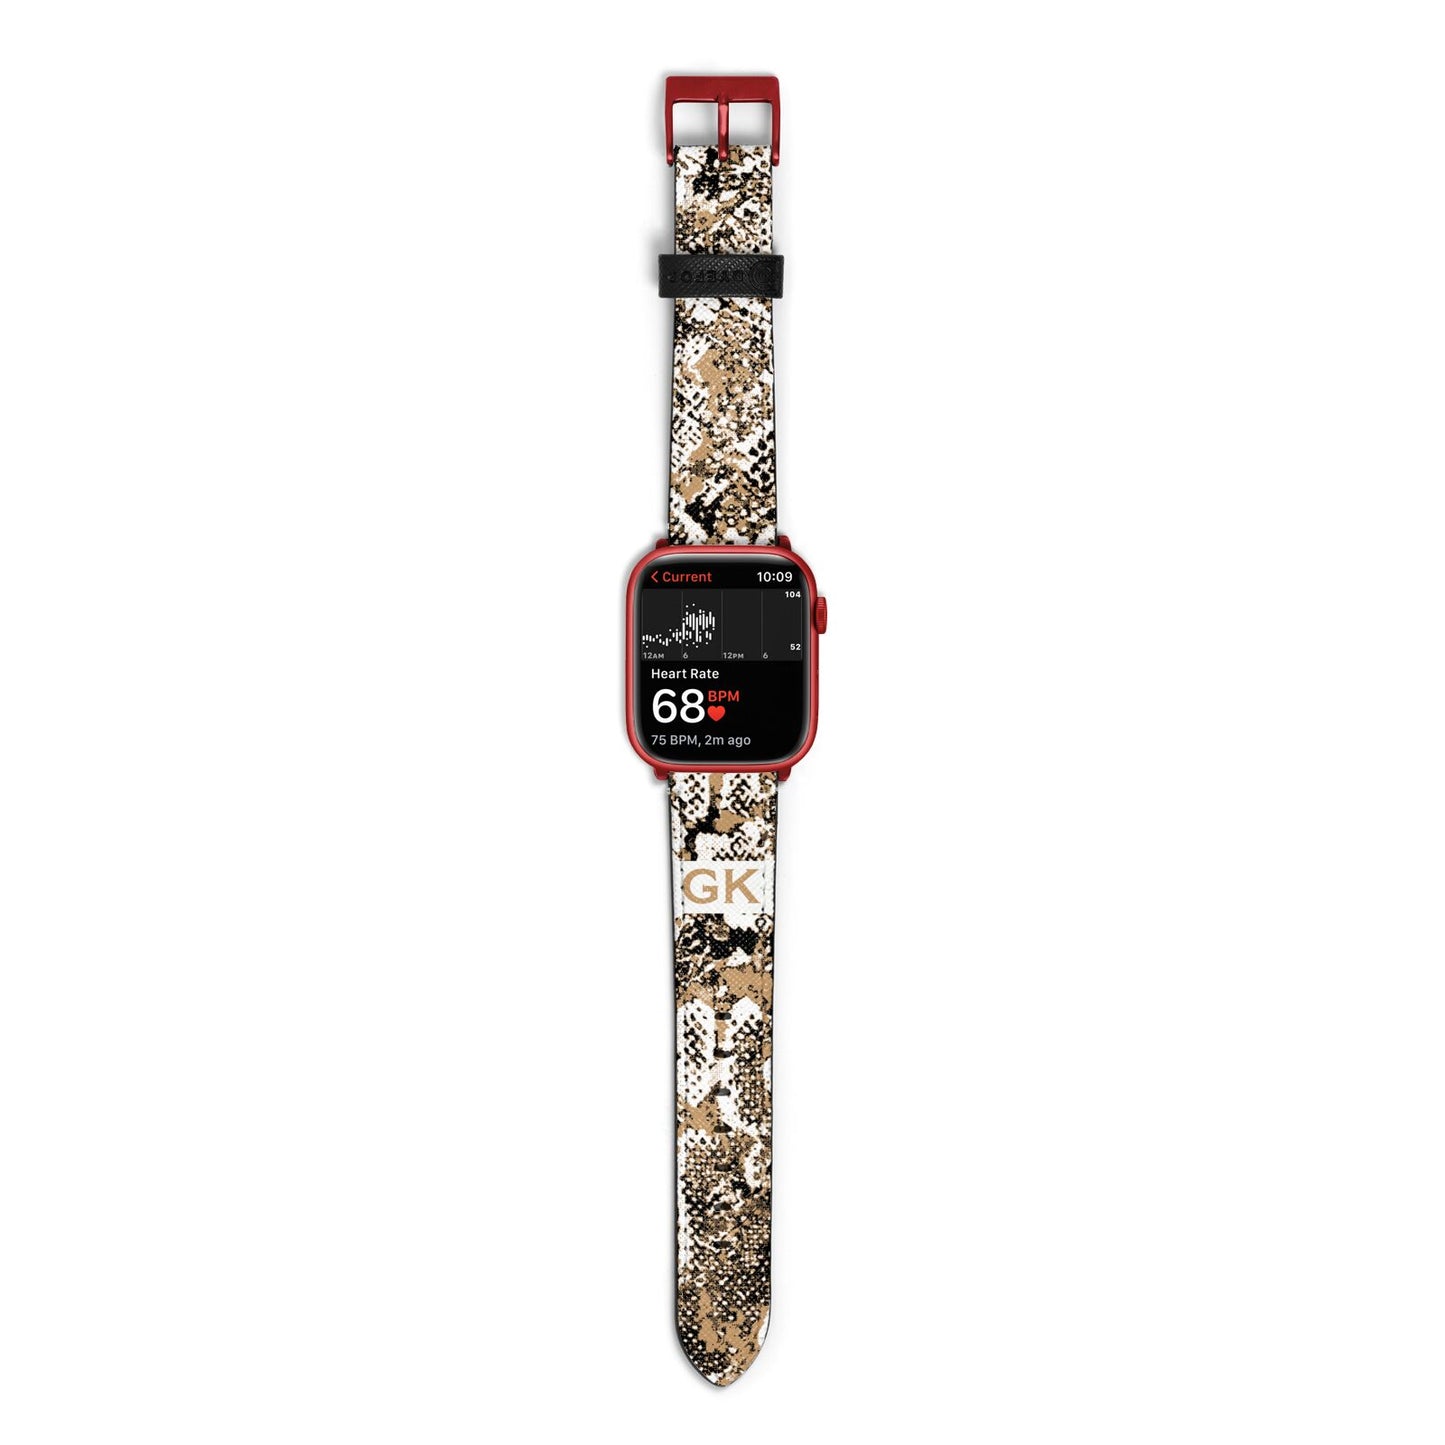 Custom Tan Snakeskin Apple Watch Strap Size 38mm with Red Hardware